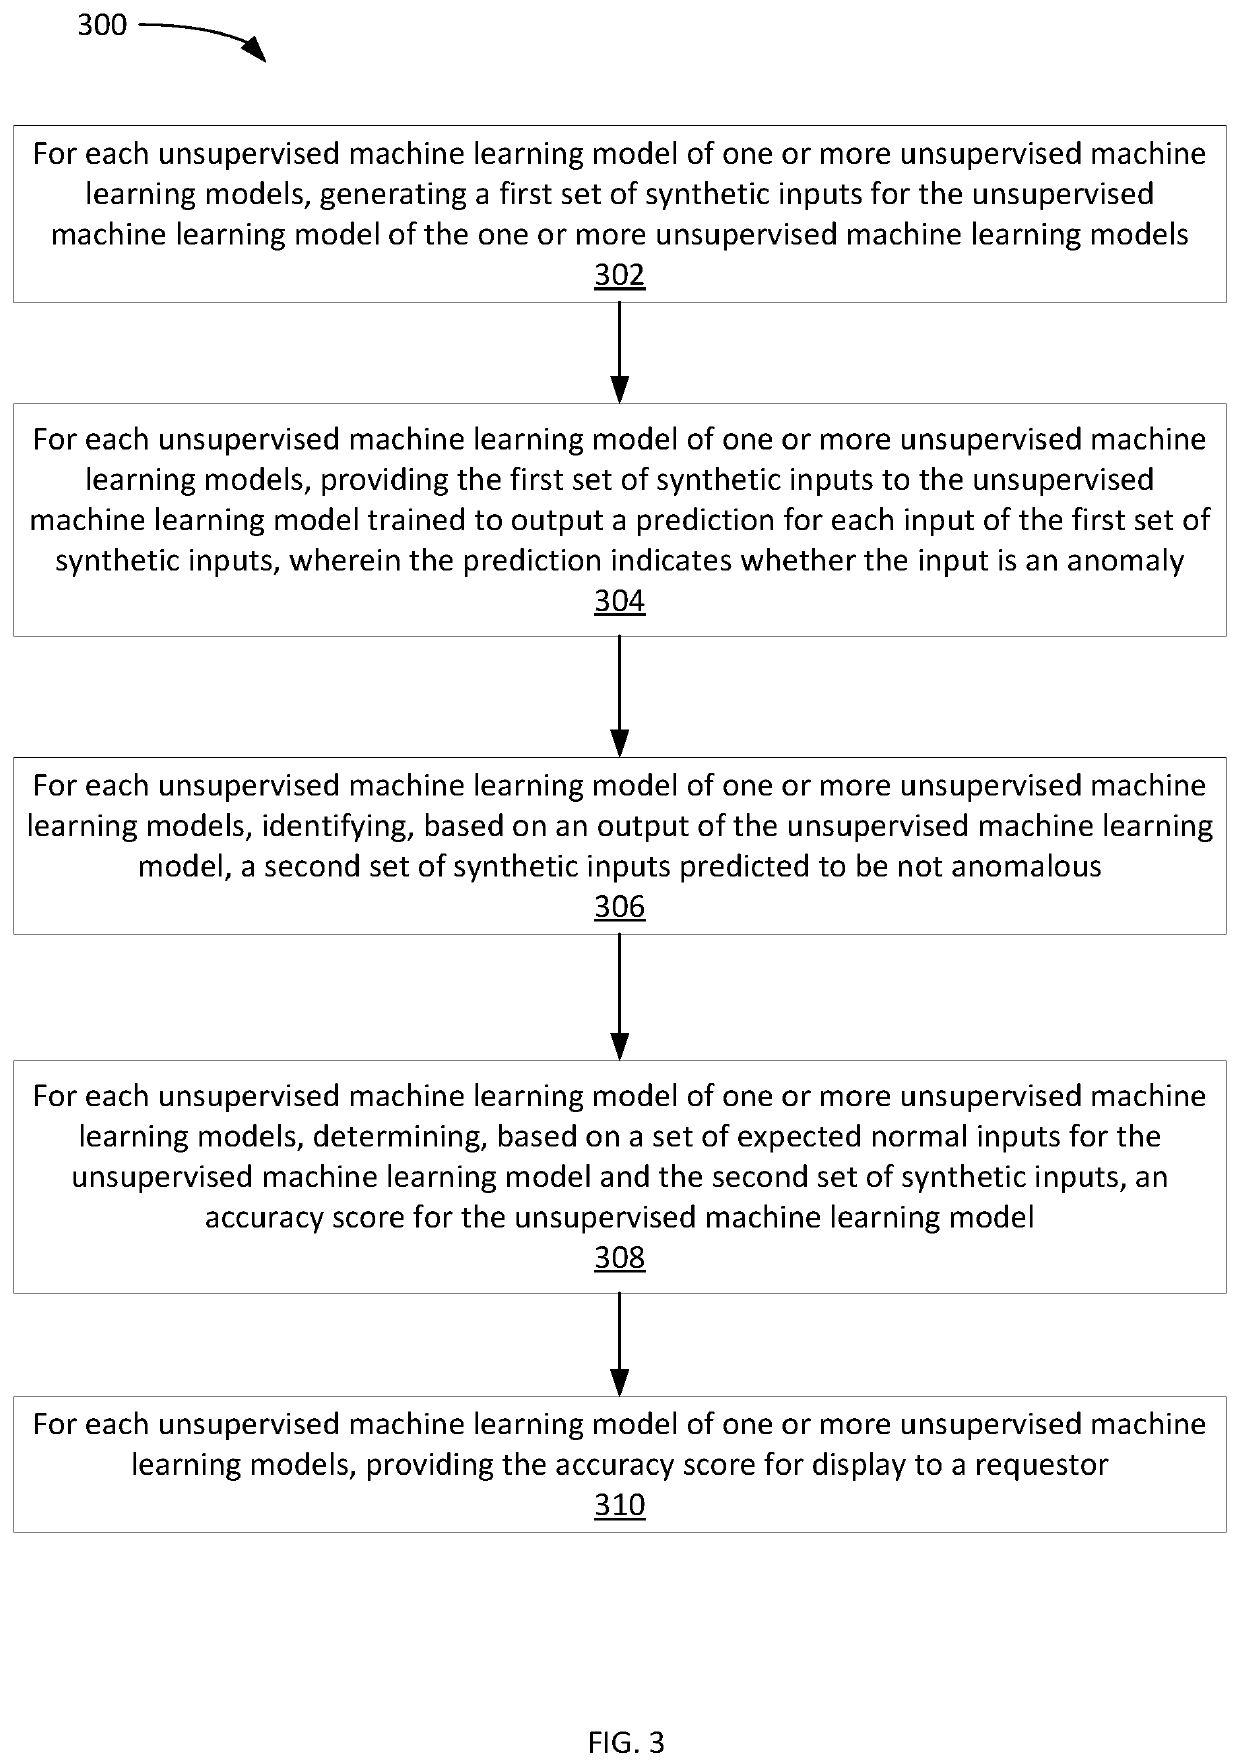 Generalized metric for machine learning model evaluation for unsupervised classification